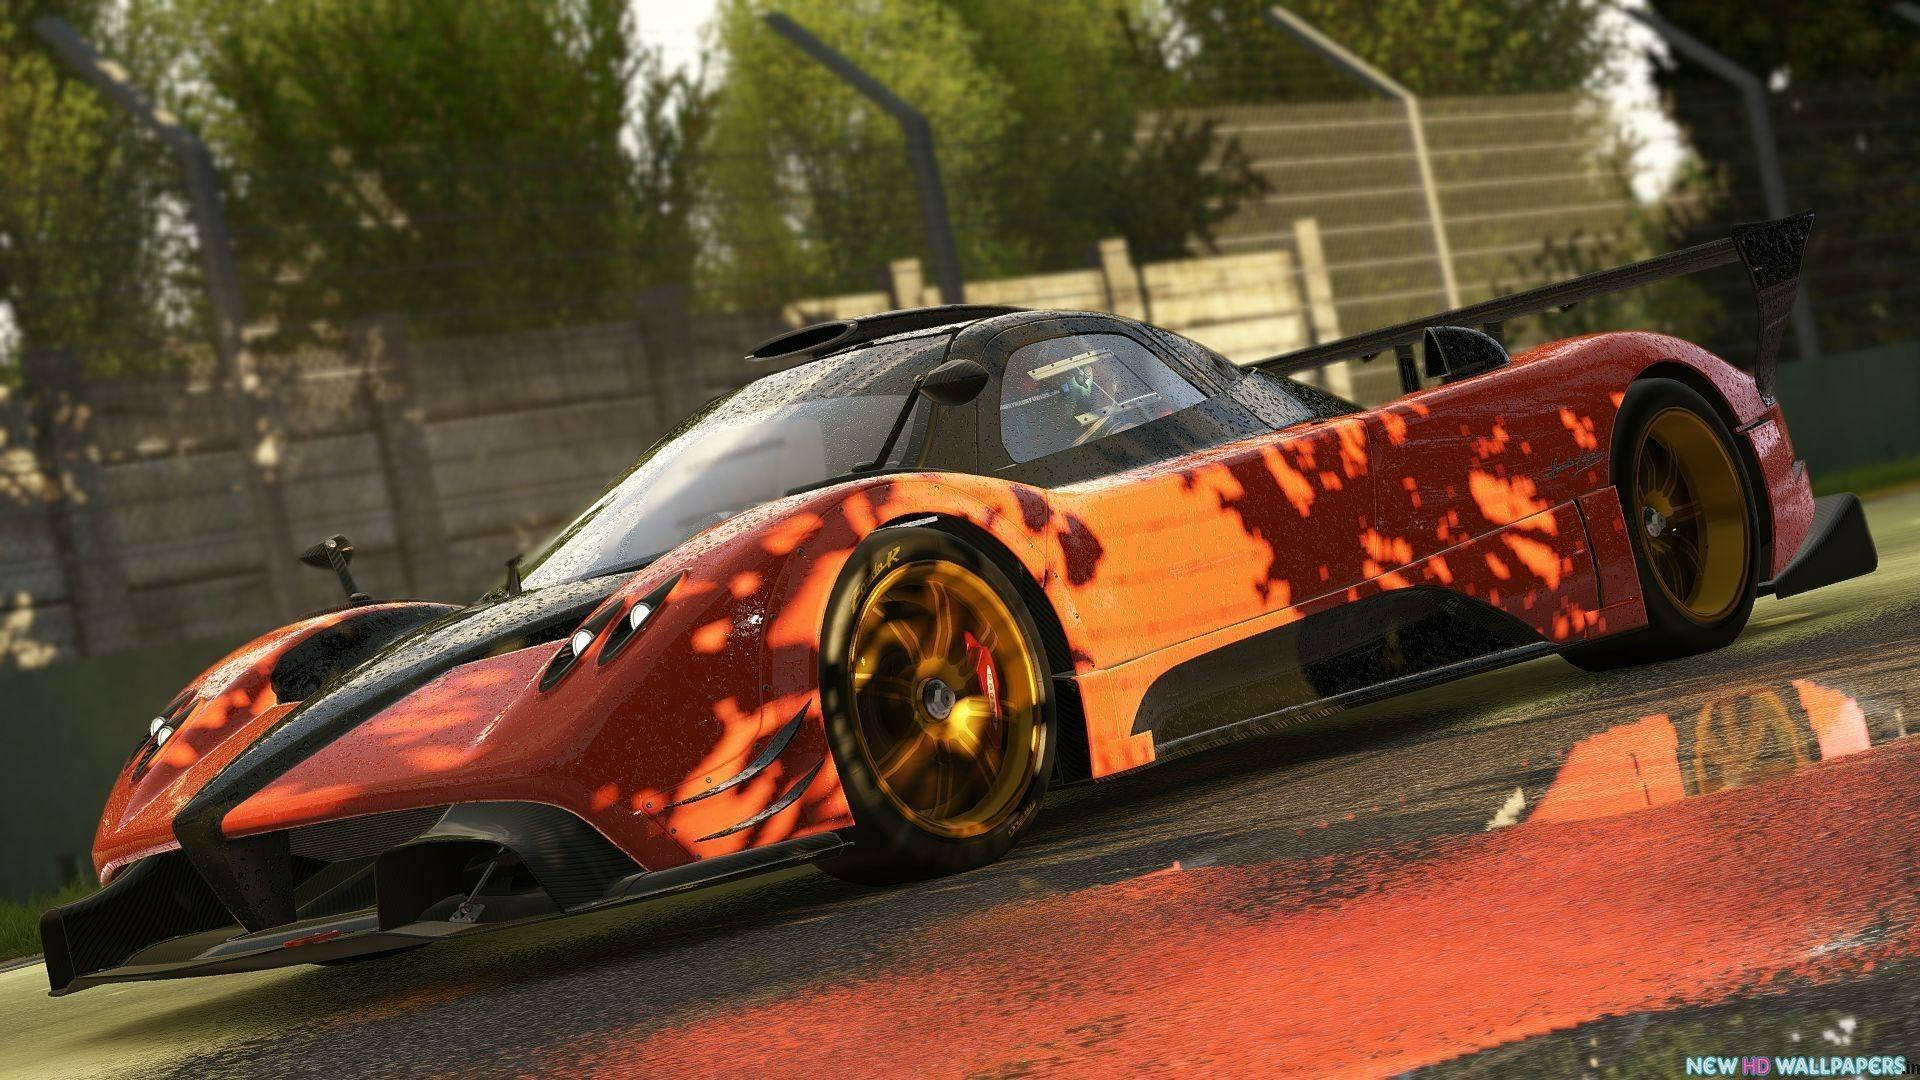 Stunning Pagani Zonda R From Project Cars Background